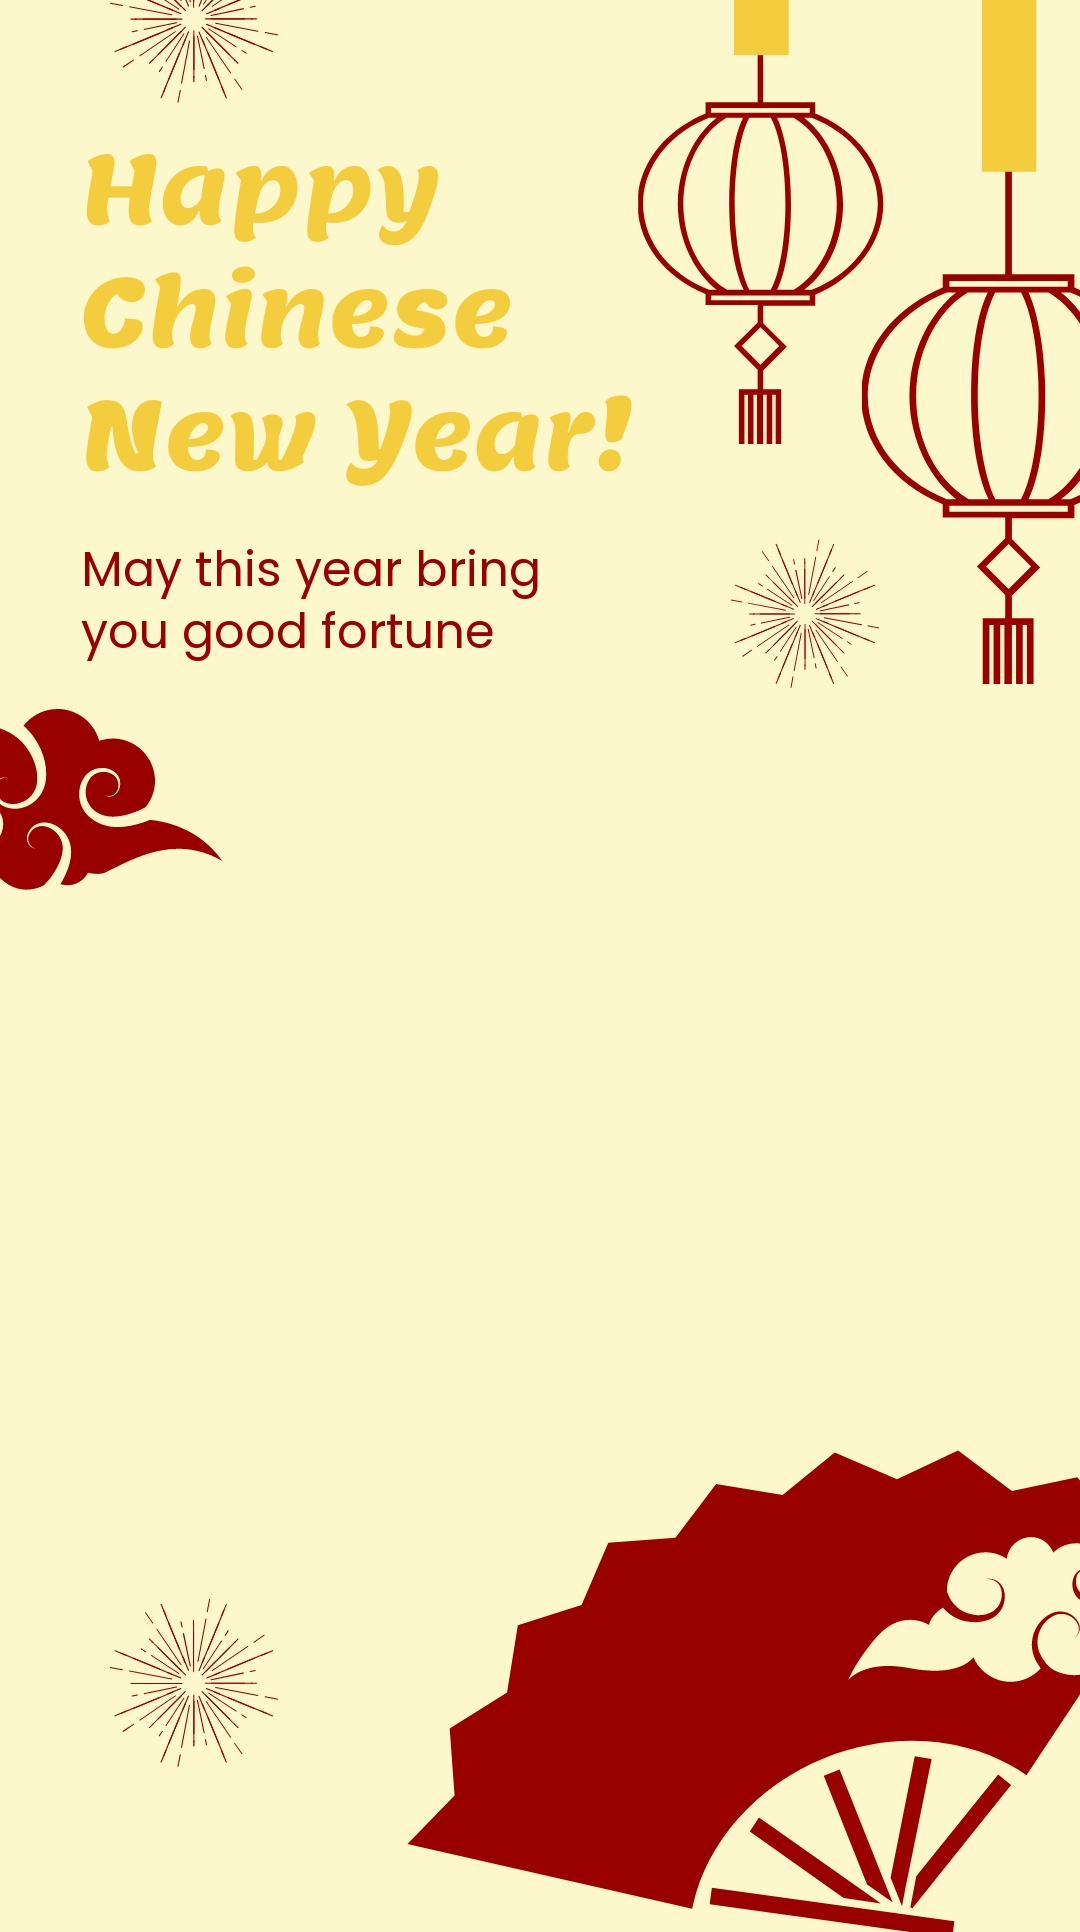 Chinese New Year Greeting Snapchat Geofilter Template.jpe